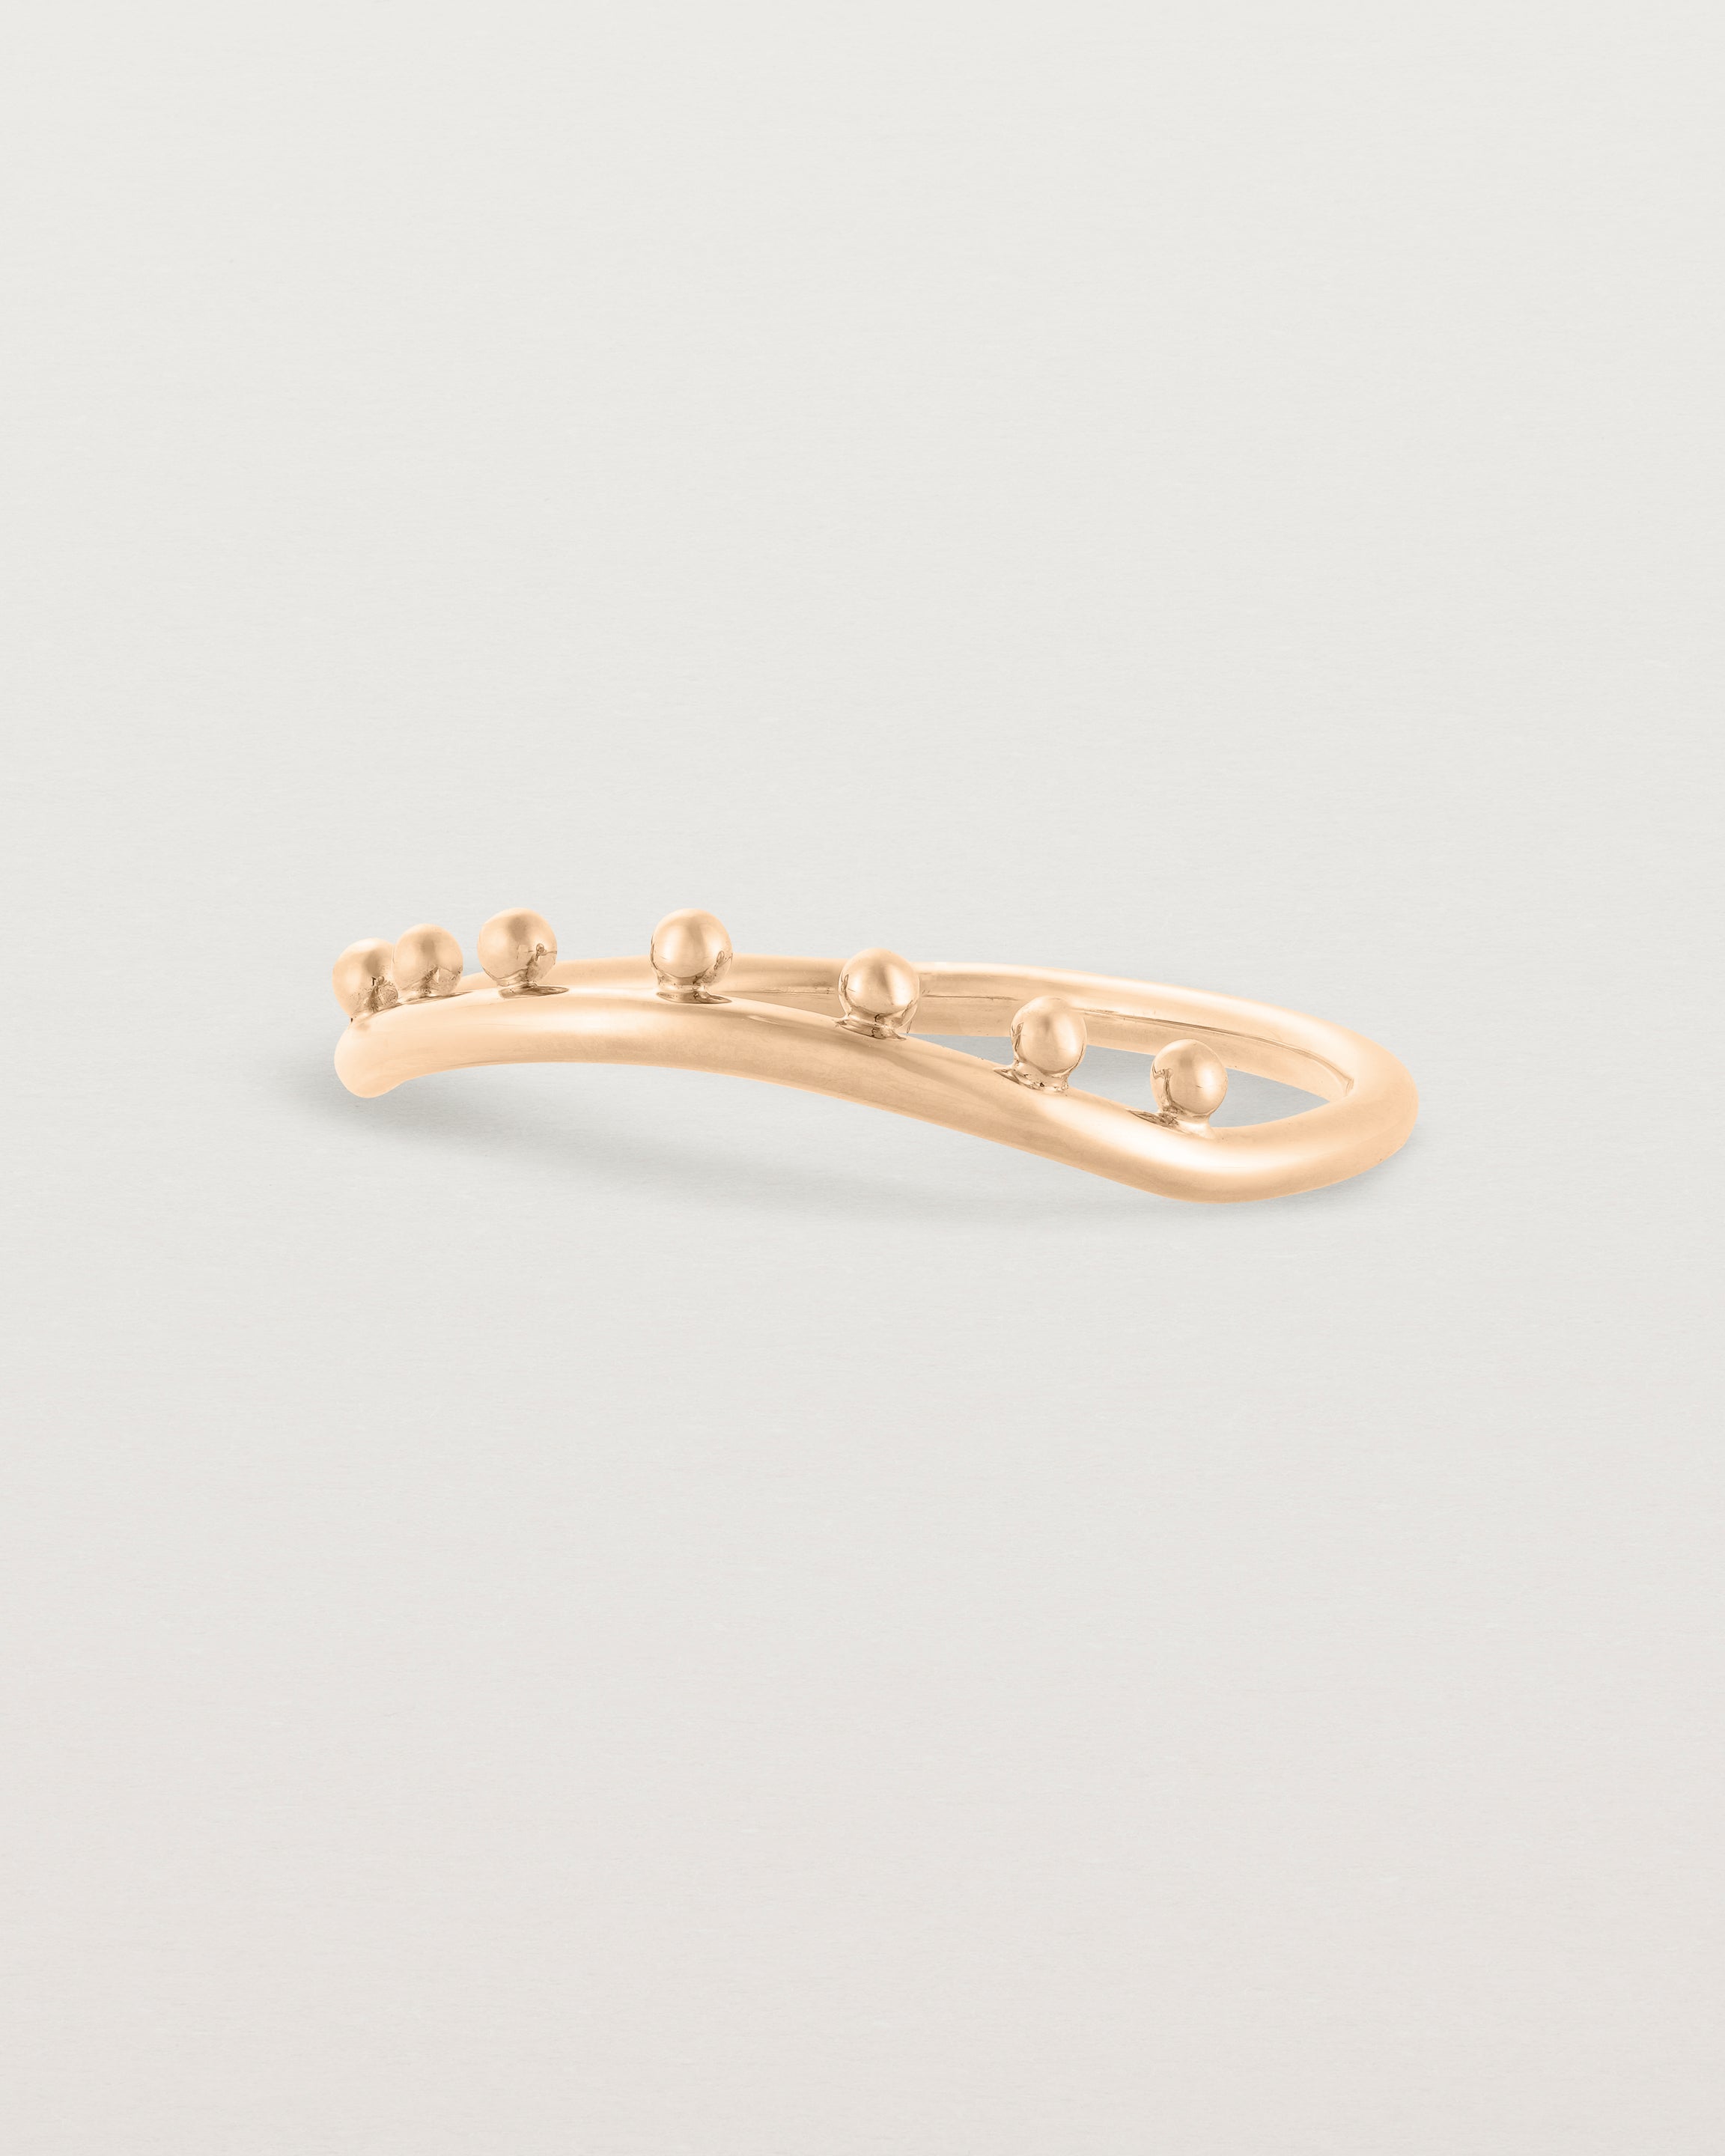 Side view of a gentle arc ring featuring dot detailing along the top of the arc, crafted in rose gold.